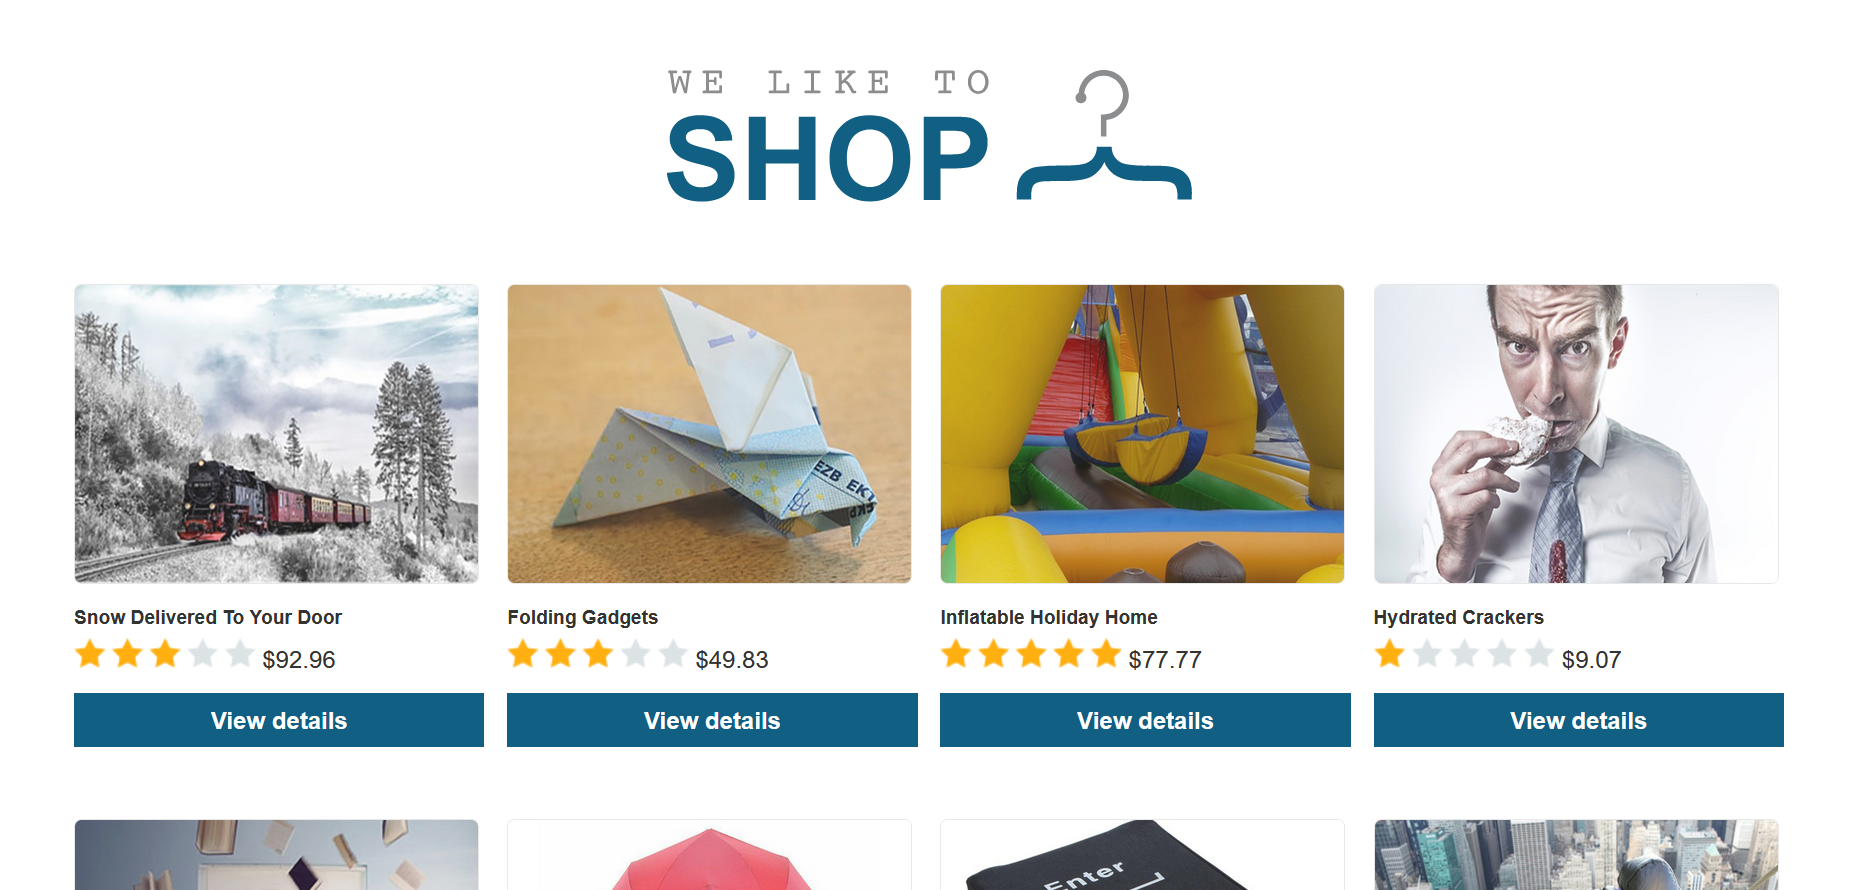 The We Like to Shop website